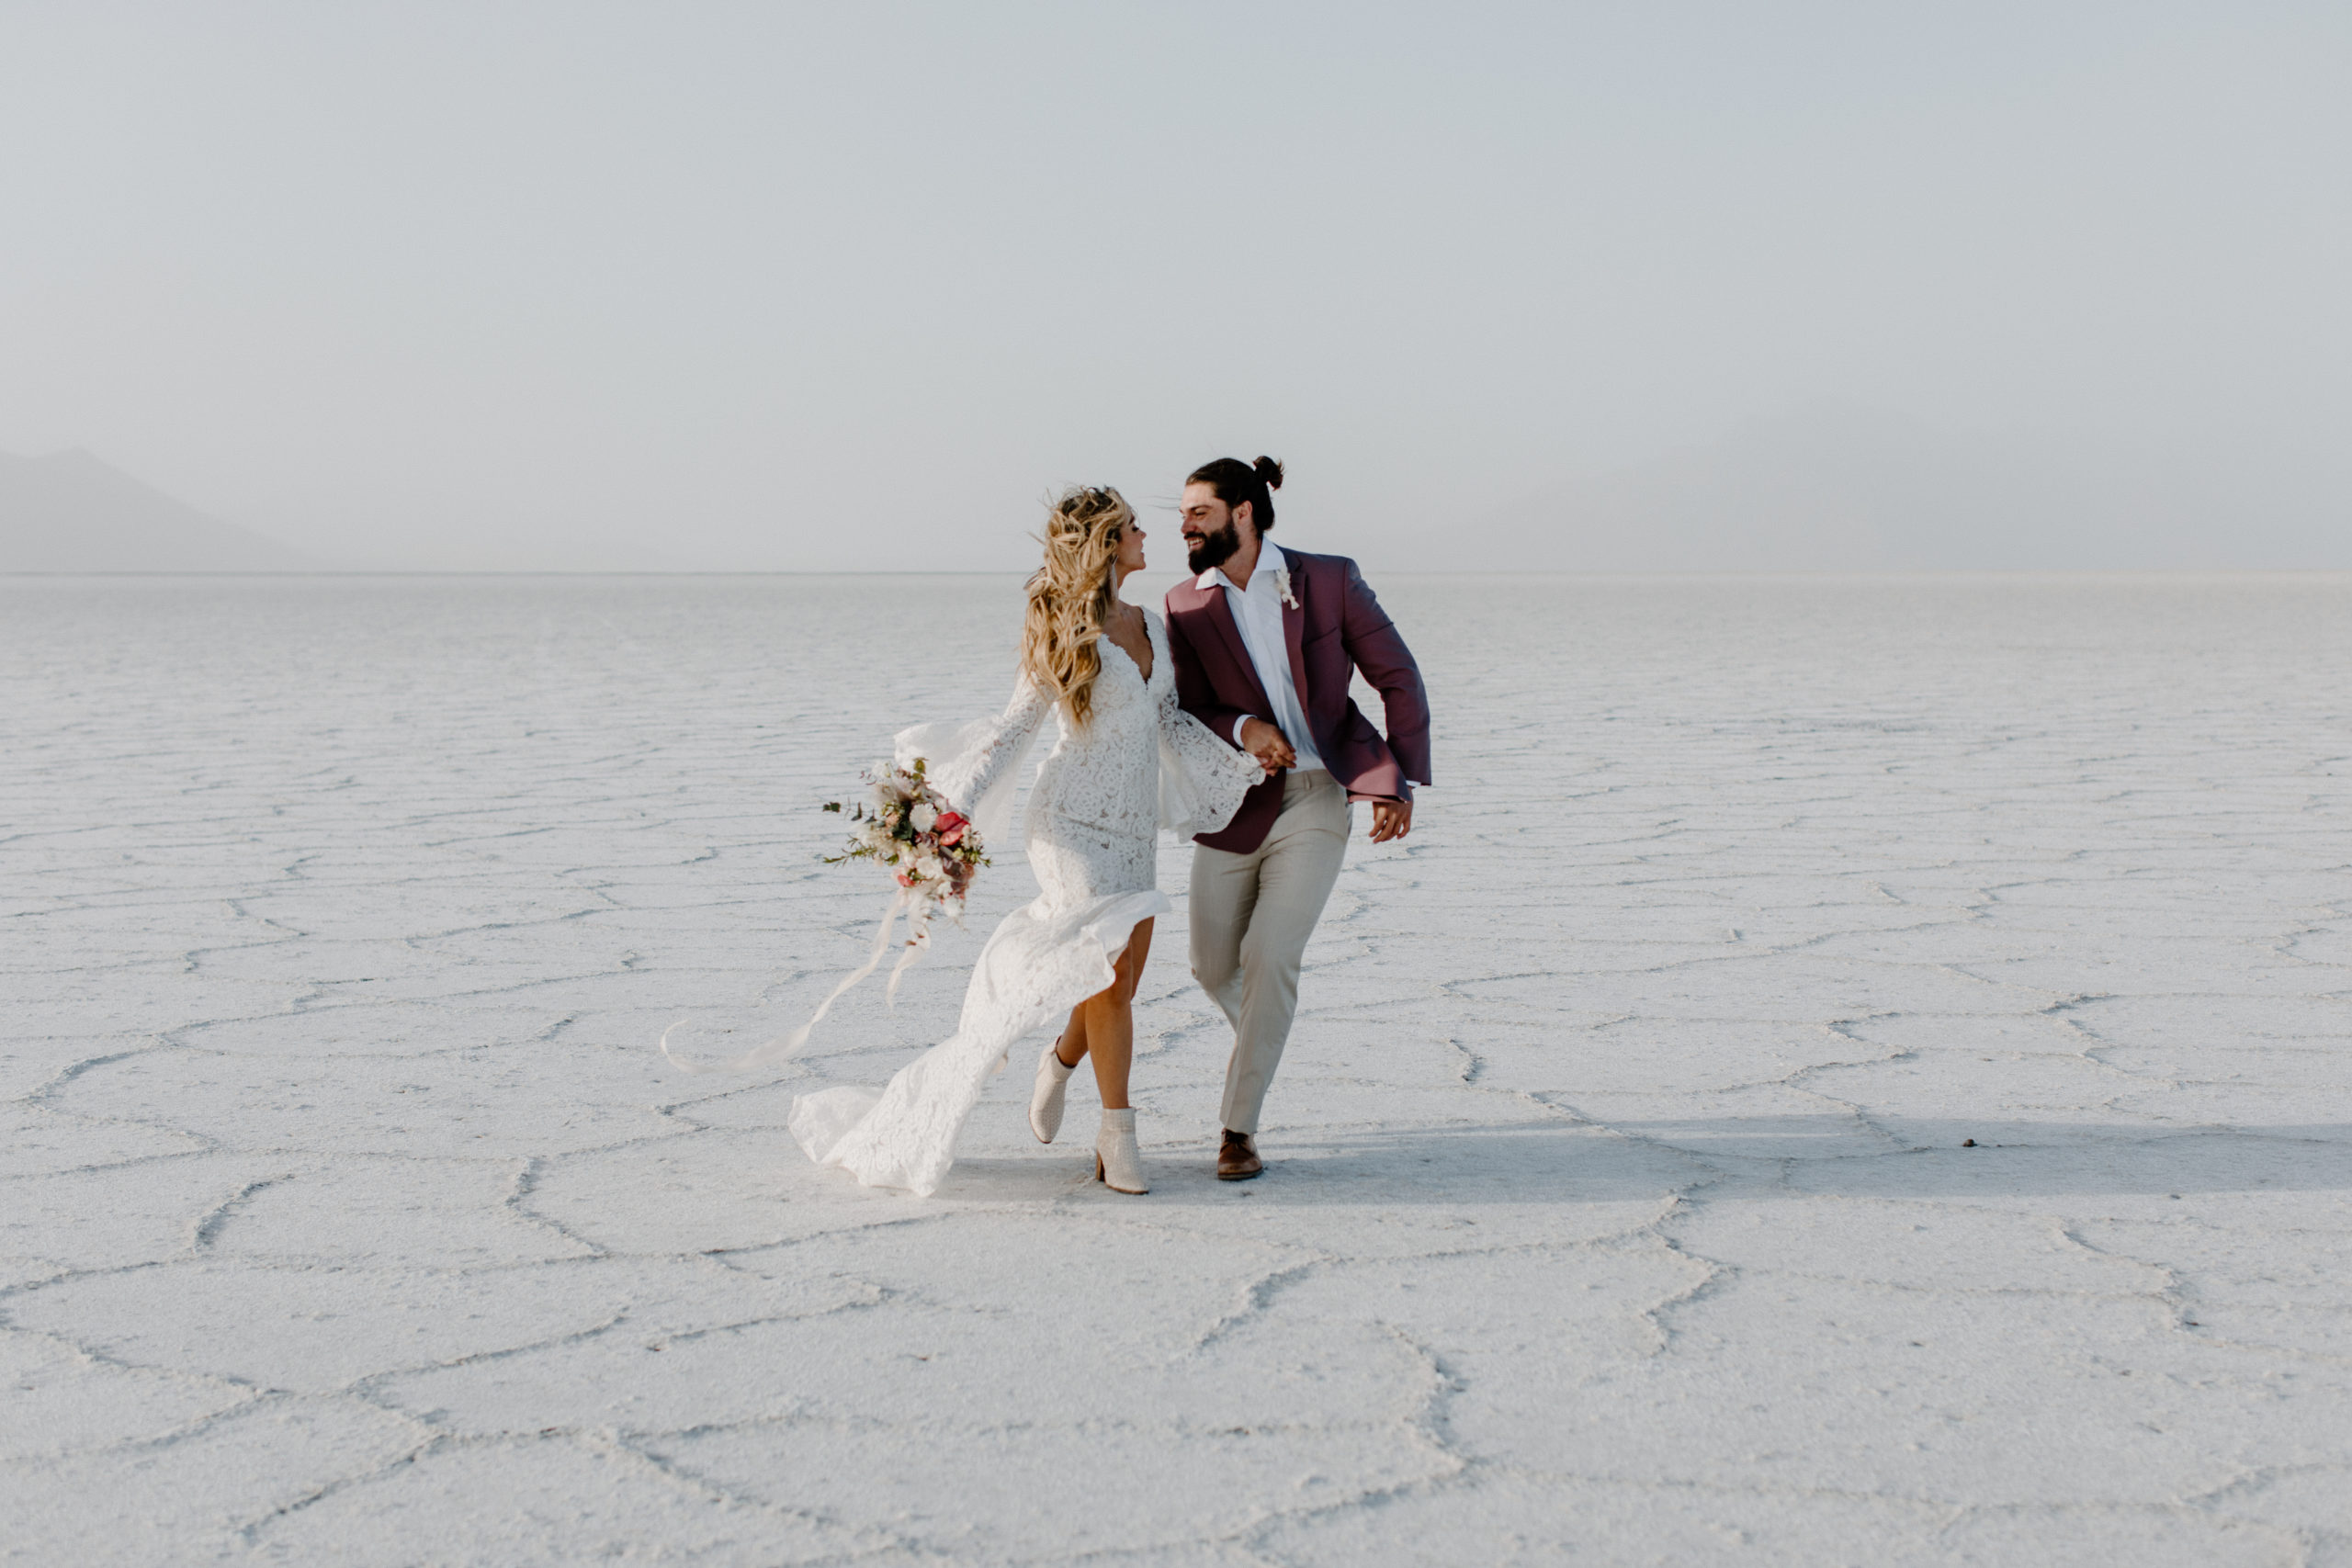 Elopement vs Wedding: 8 Differences You Should Know 